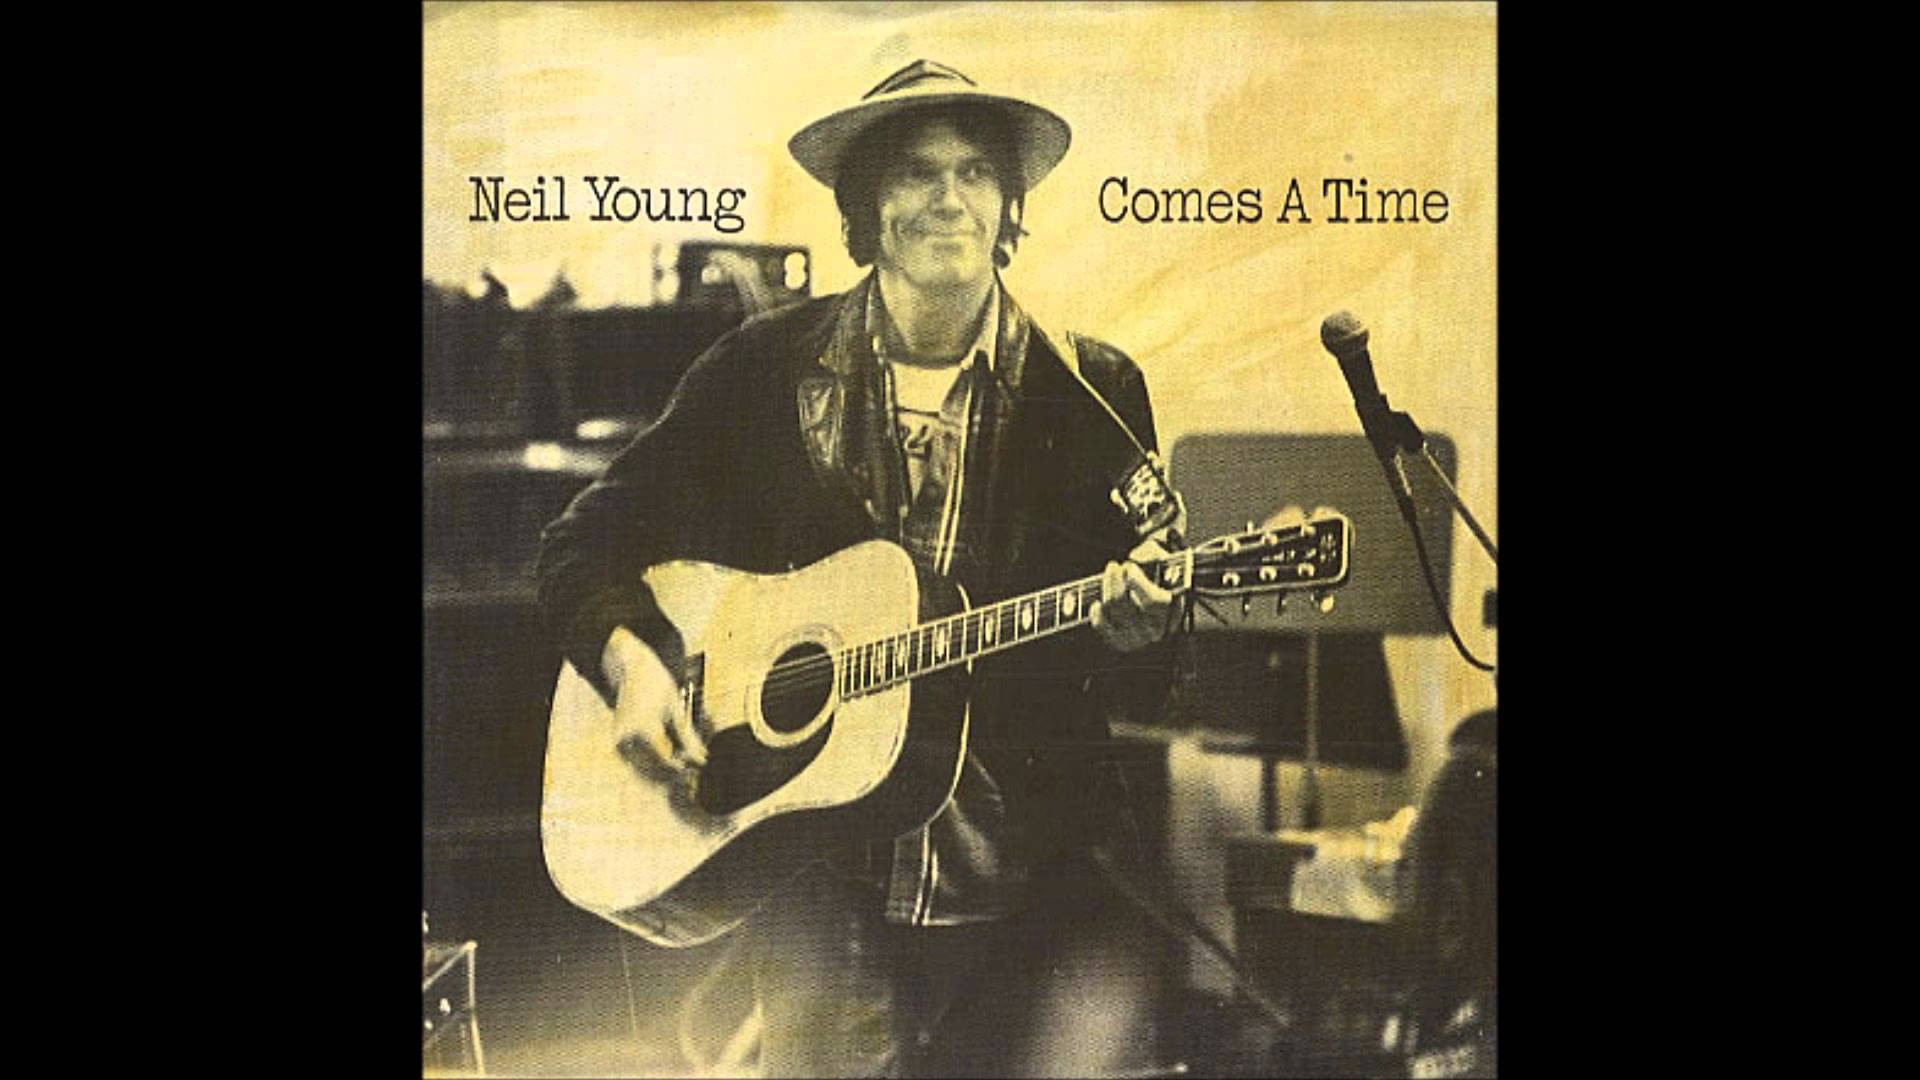 Neil Young - Motorcycle Mama (Featuring Nicolette Larson) - YouTube